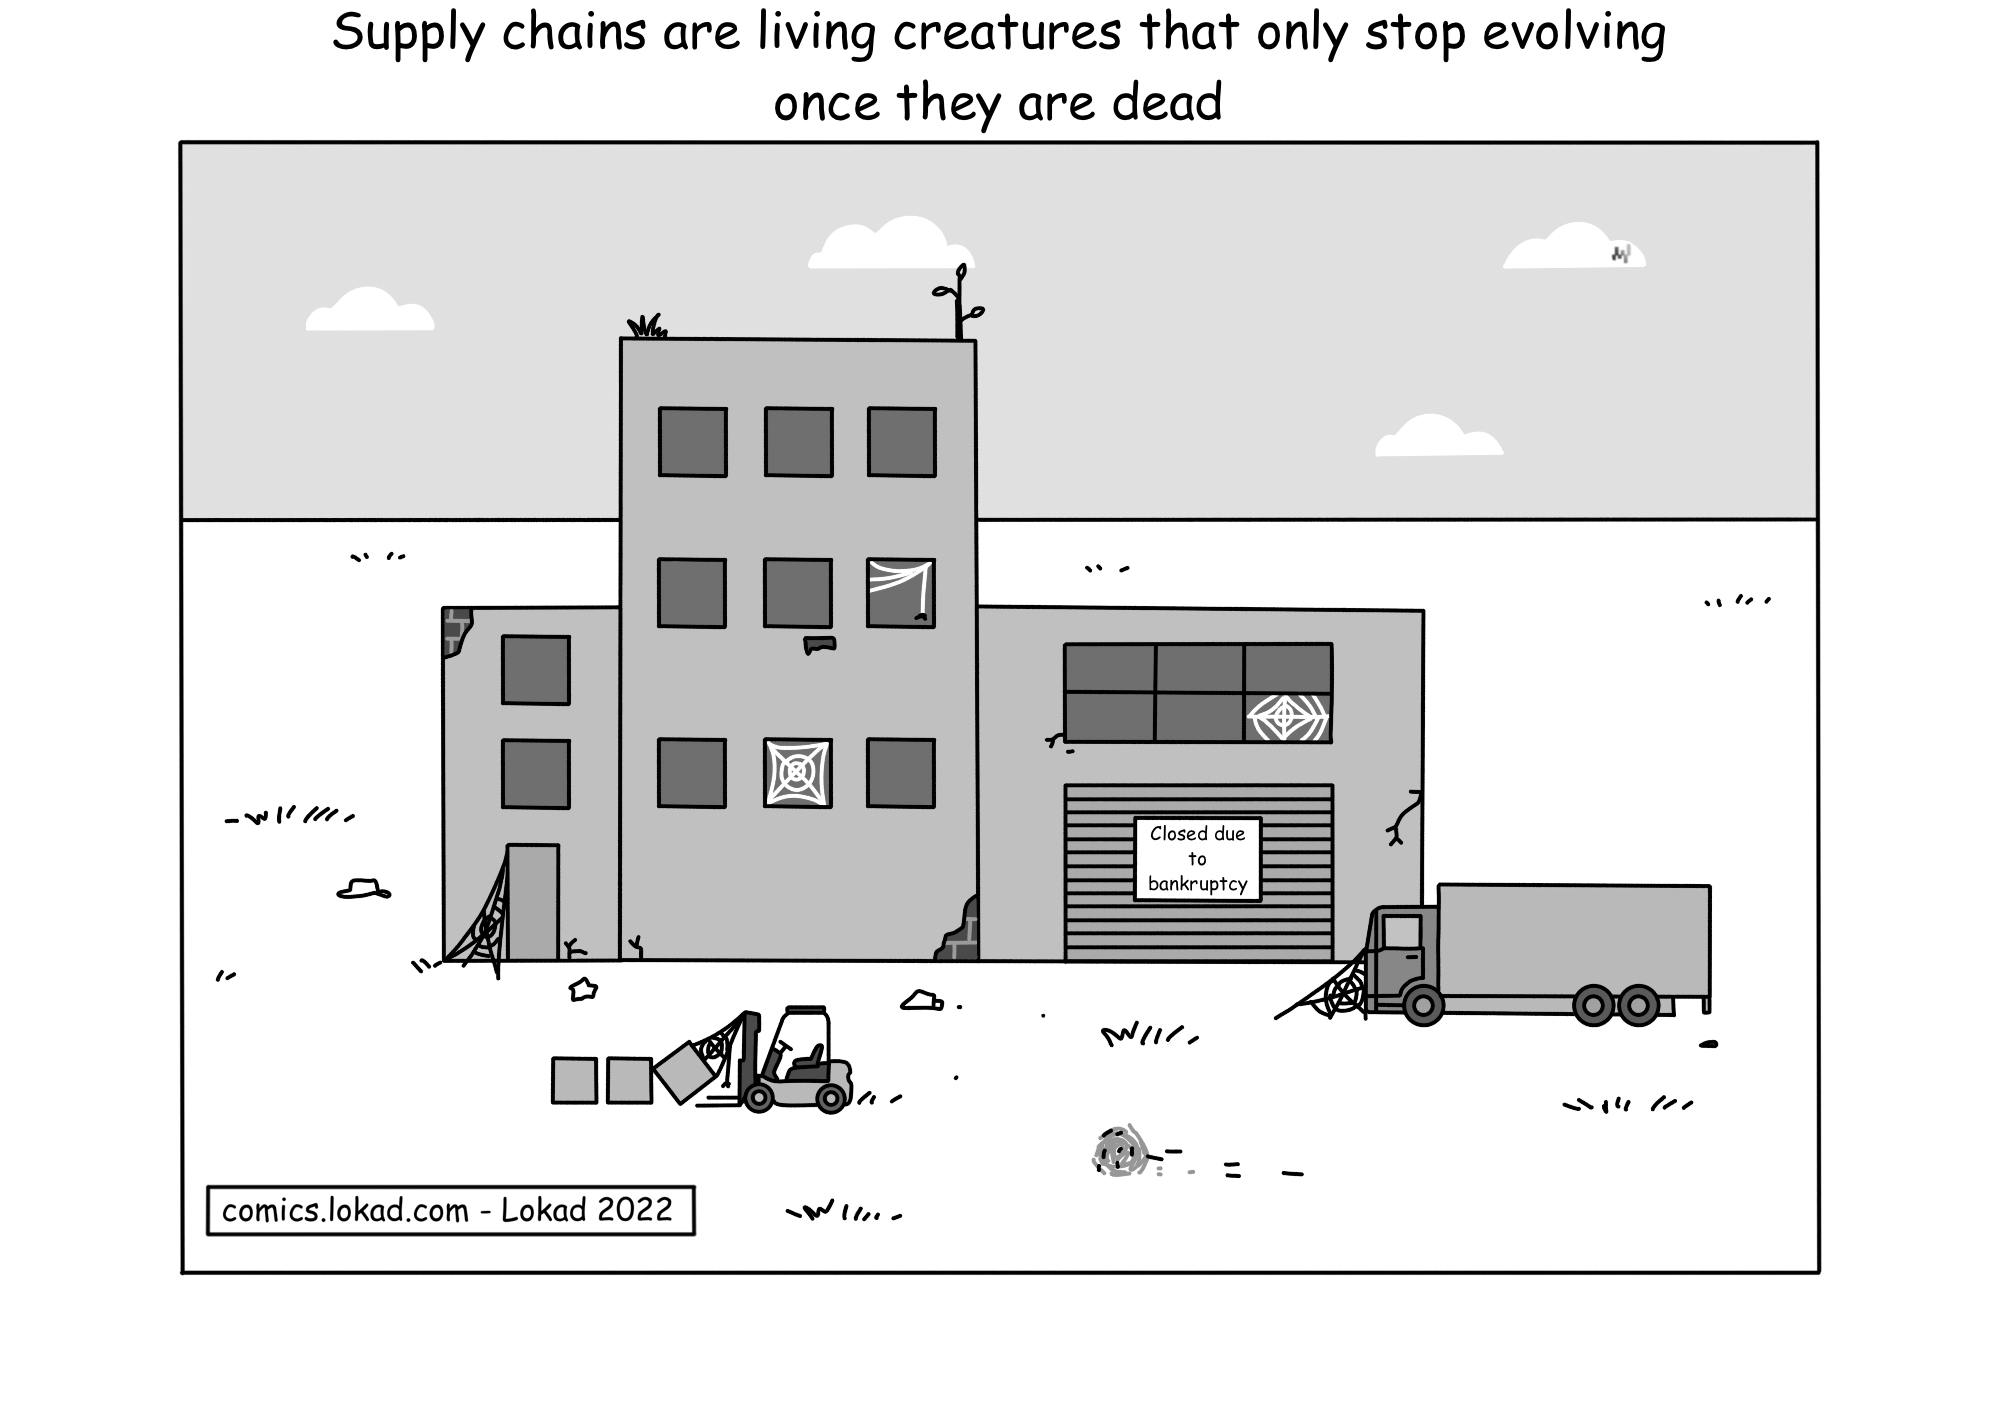 Supply chains are living creatures that only stop evolving once they are dead